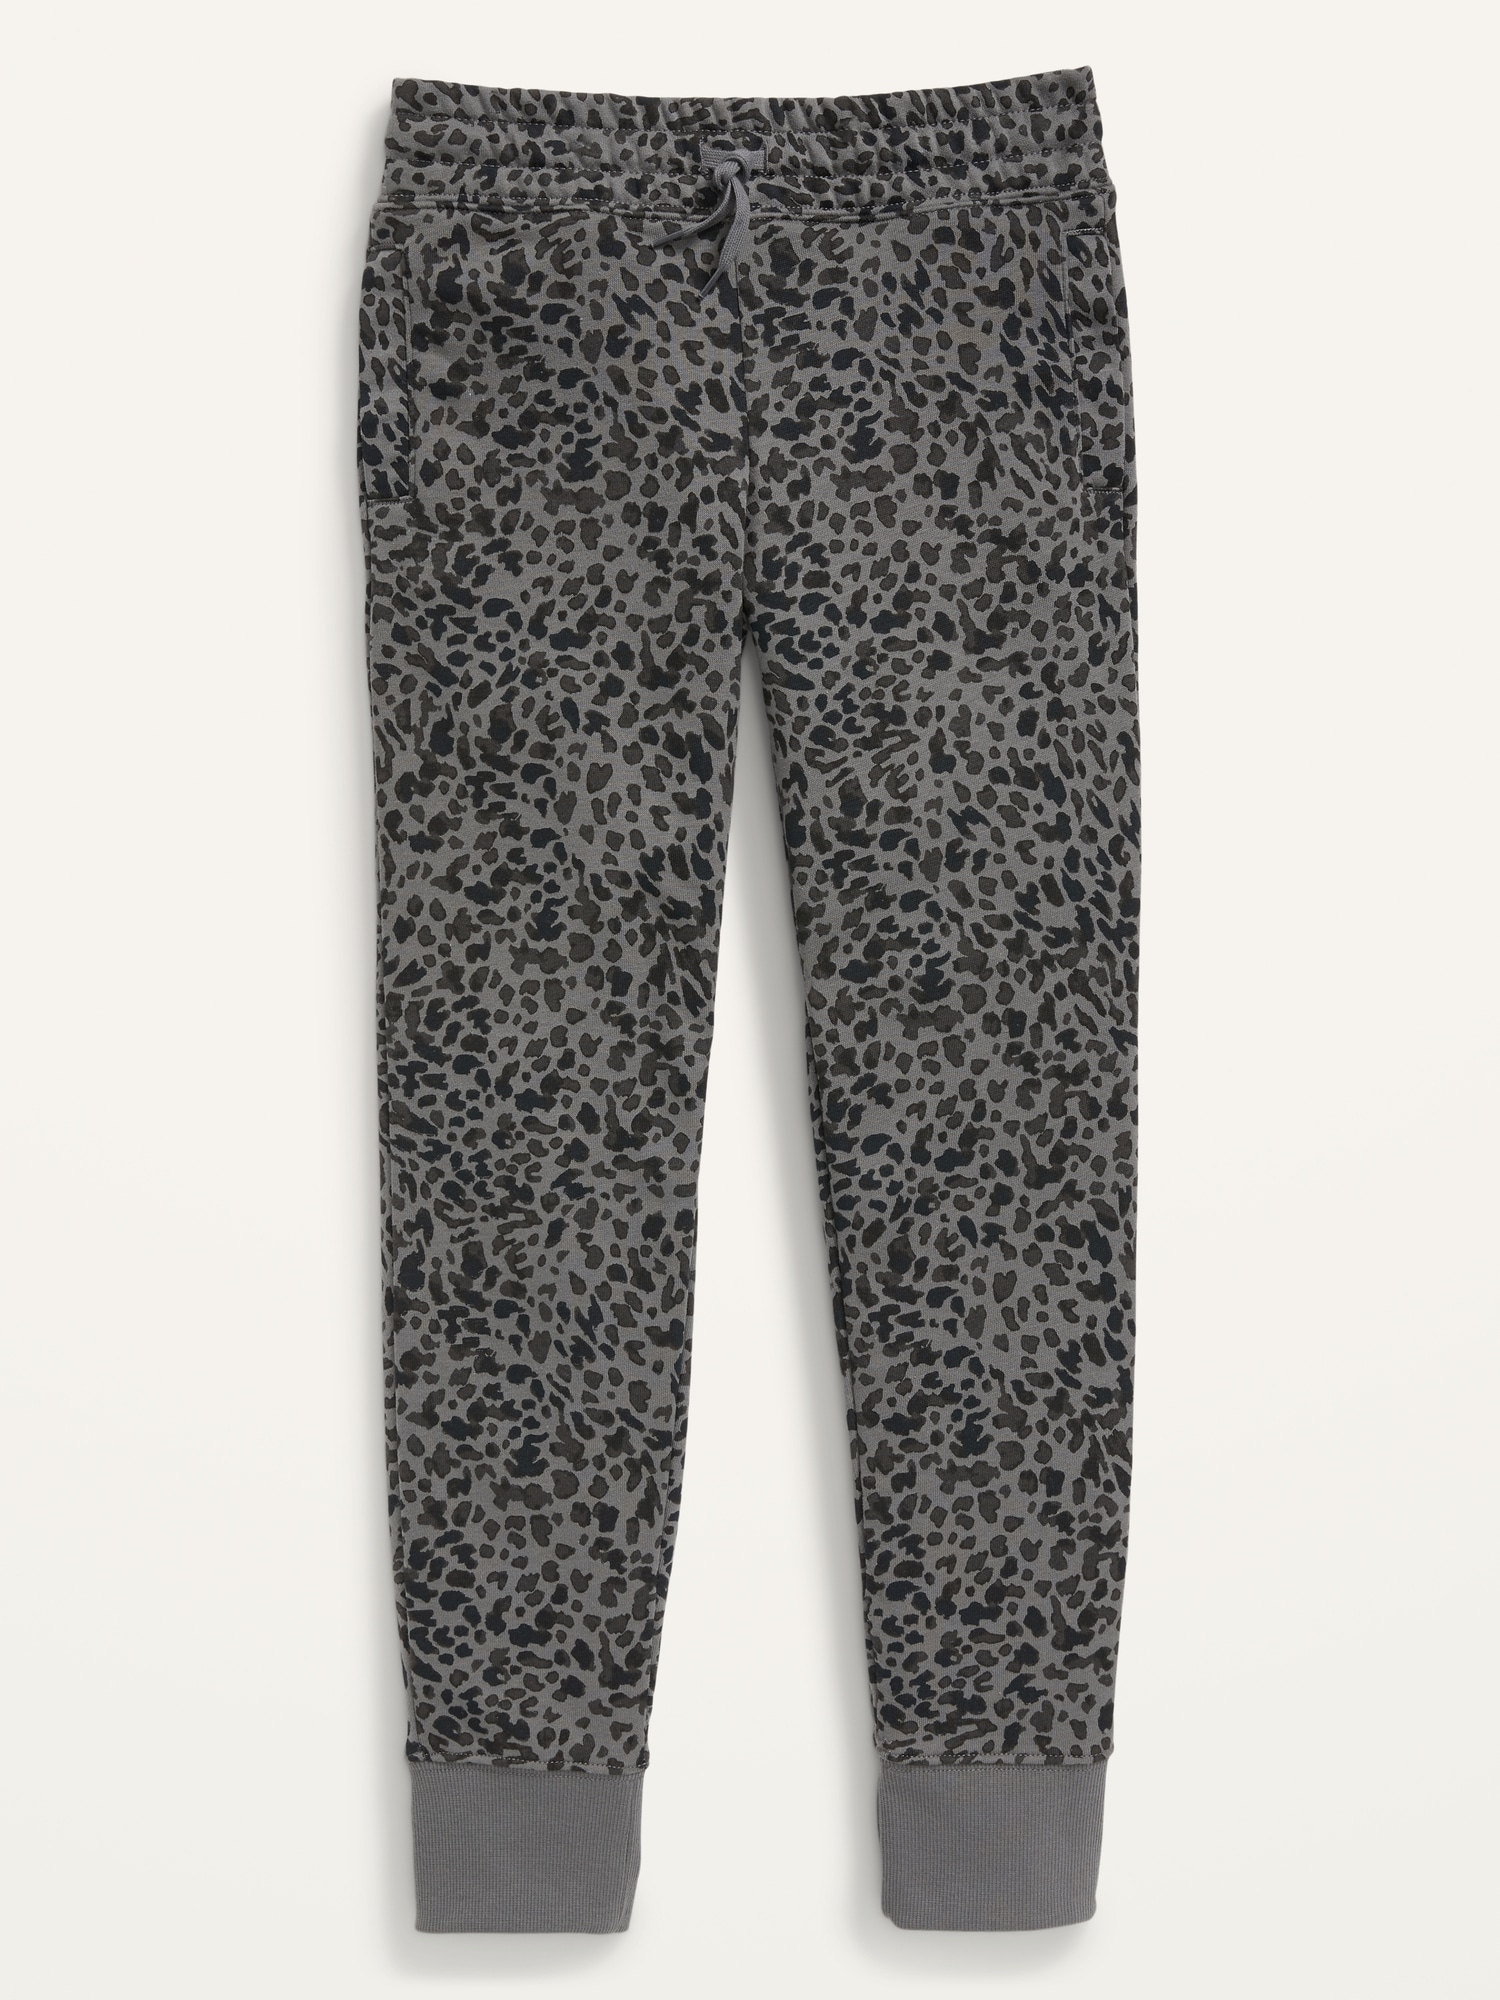 High-Waisted Vintage Printed Jogger Sweatpants for Girls